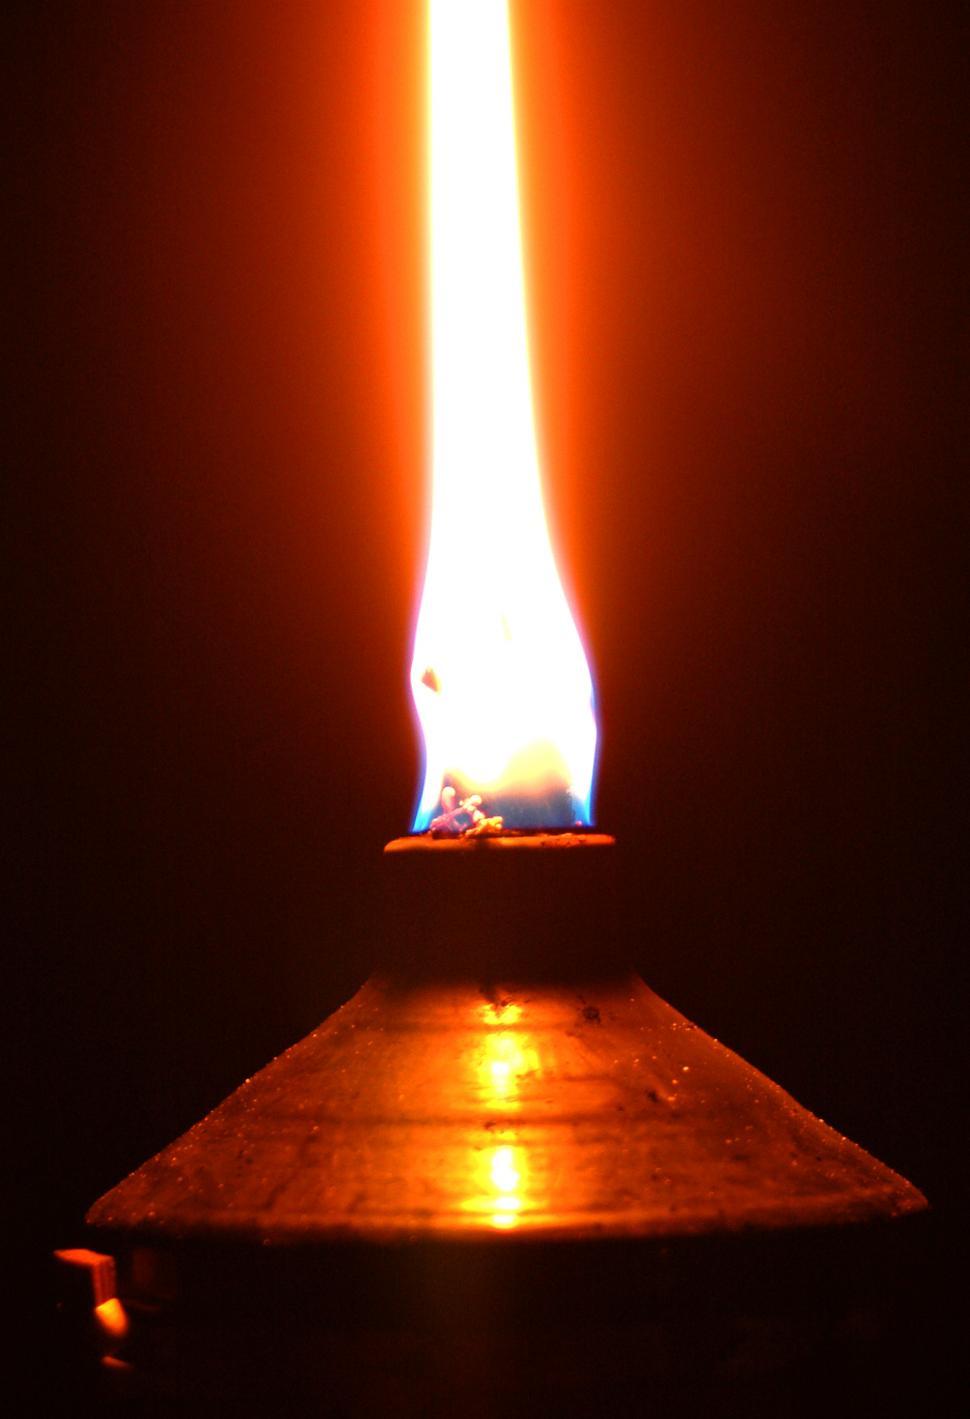 Free Image of A Candle Illuminated in Darkness 